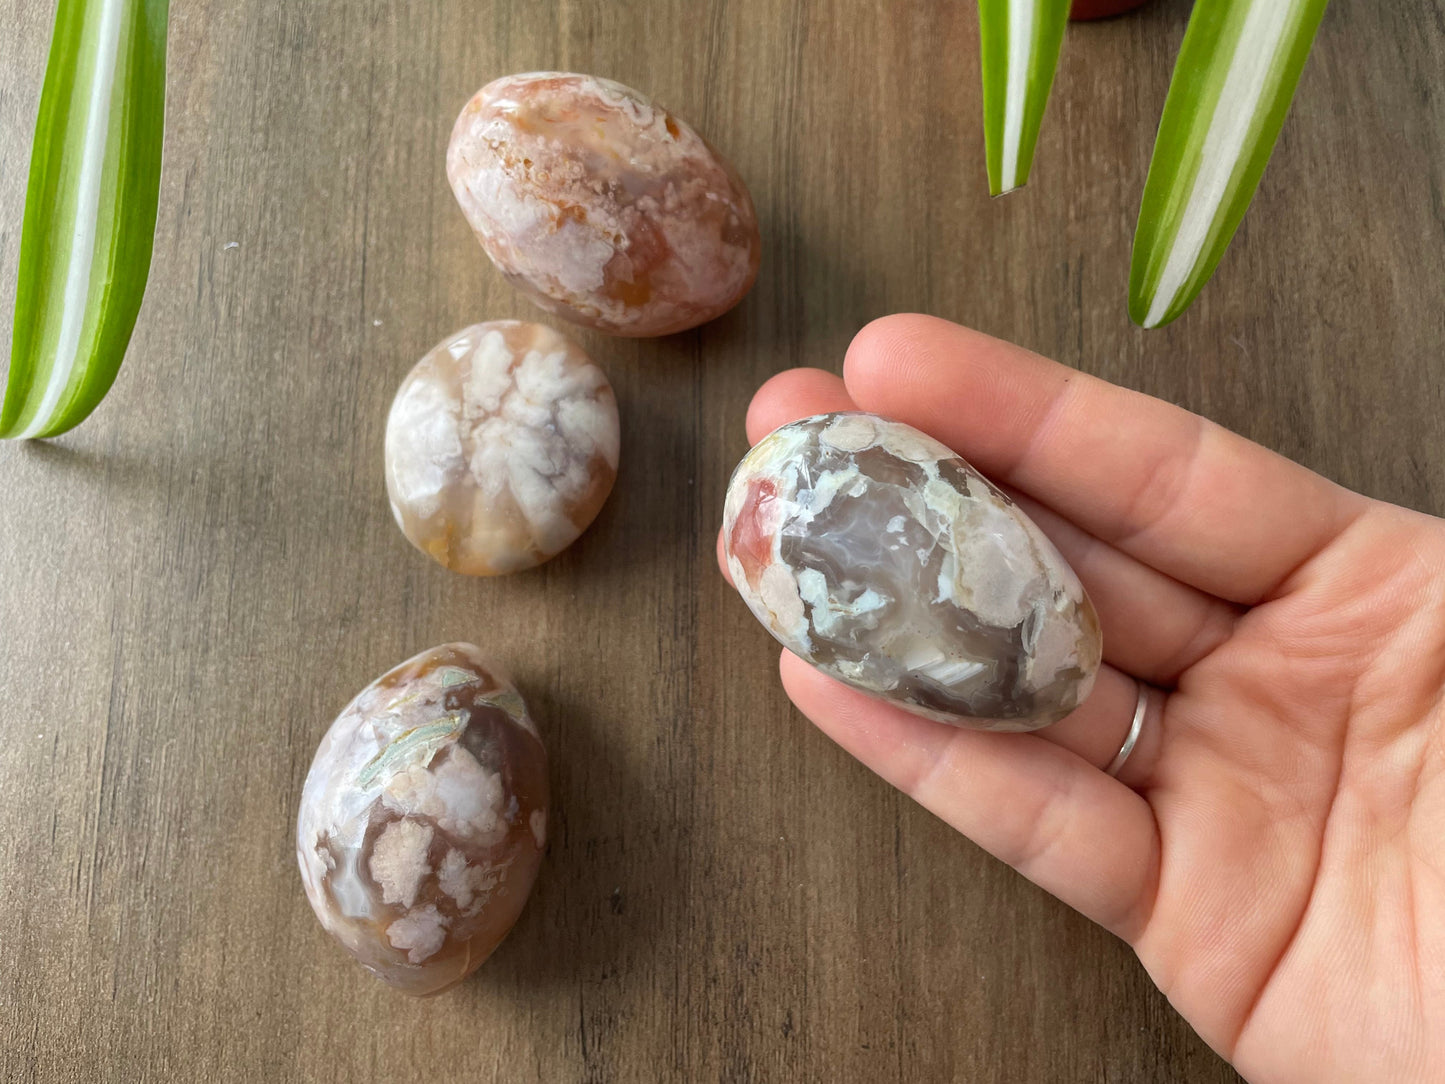 Pictured are various polished flower agate stones.